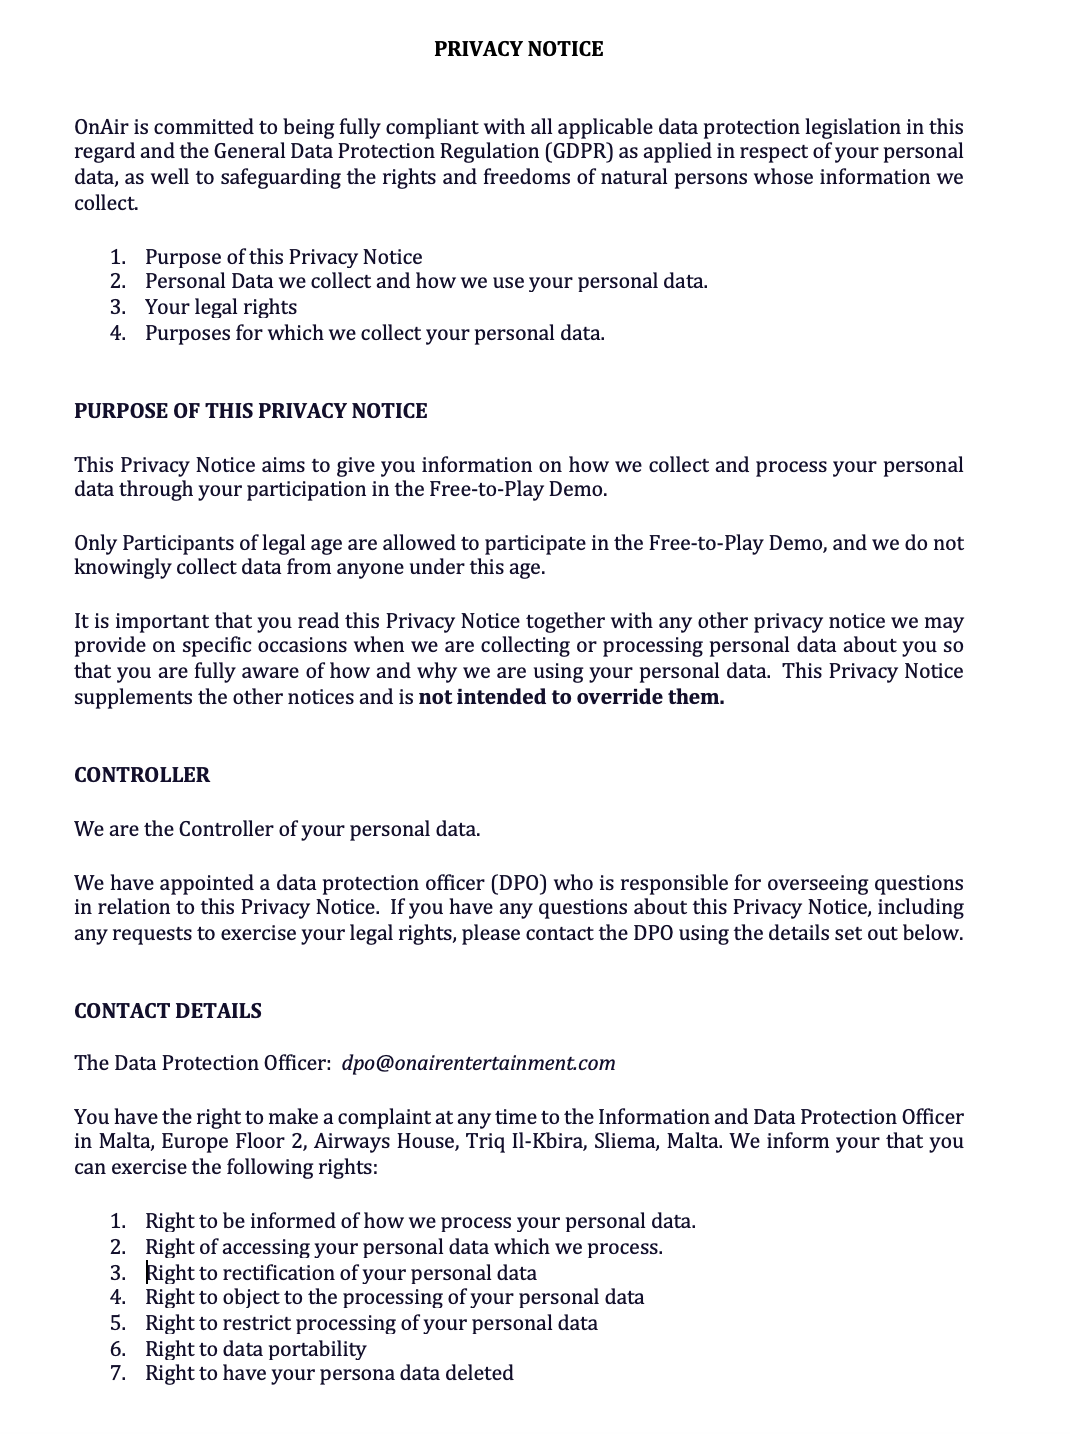 Screenshot of the terms and conditions of Nexus Roulette's free-to-play demo.